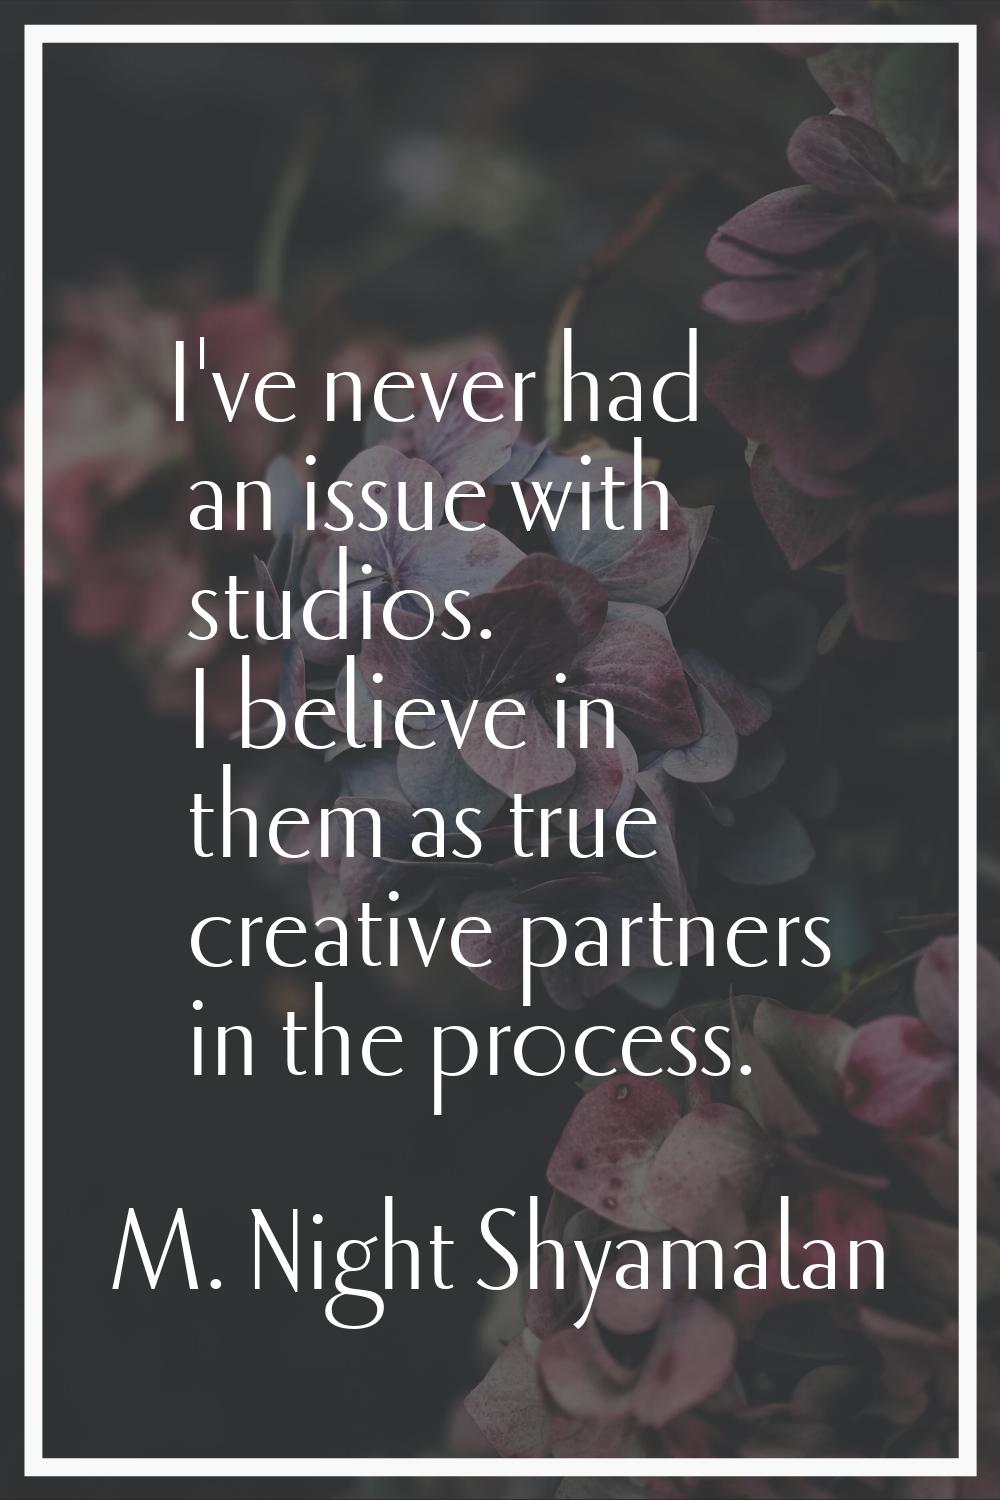 I've never had an issue with studios. I believe in them as true creative partners in the process.